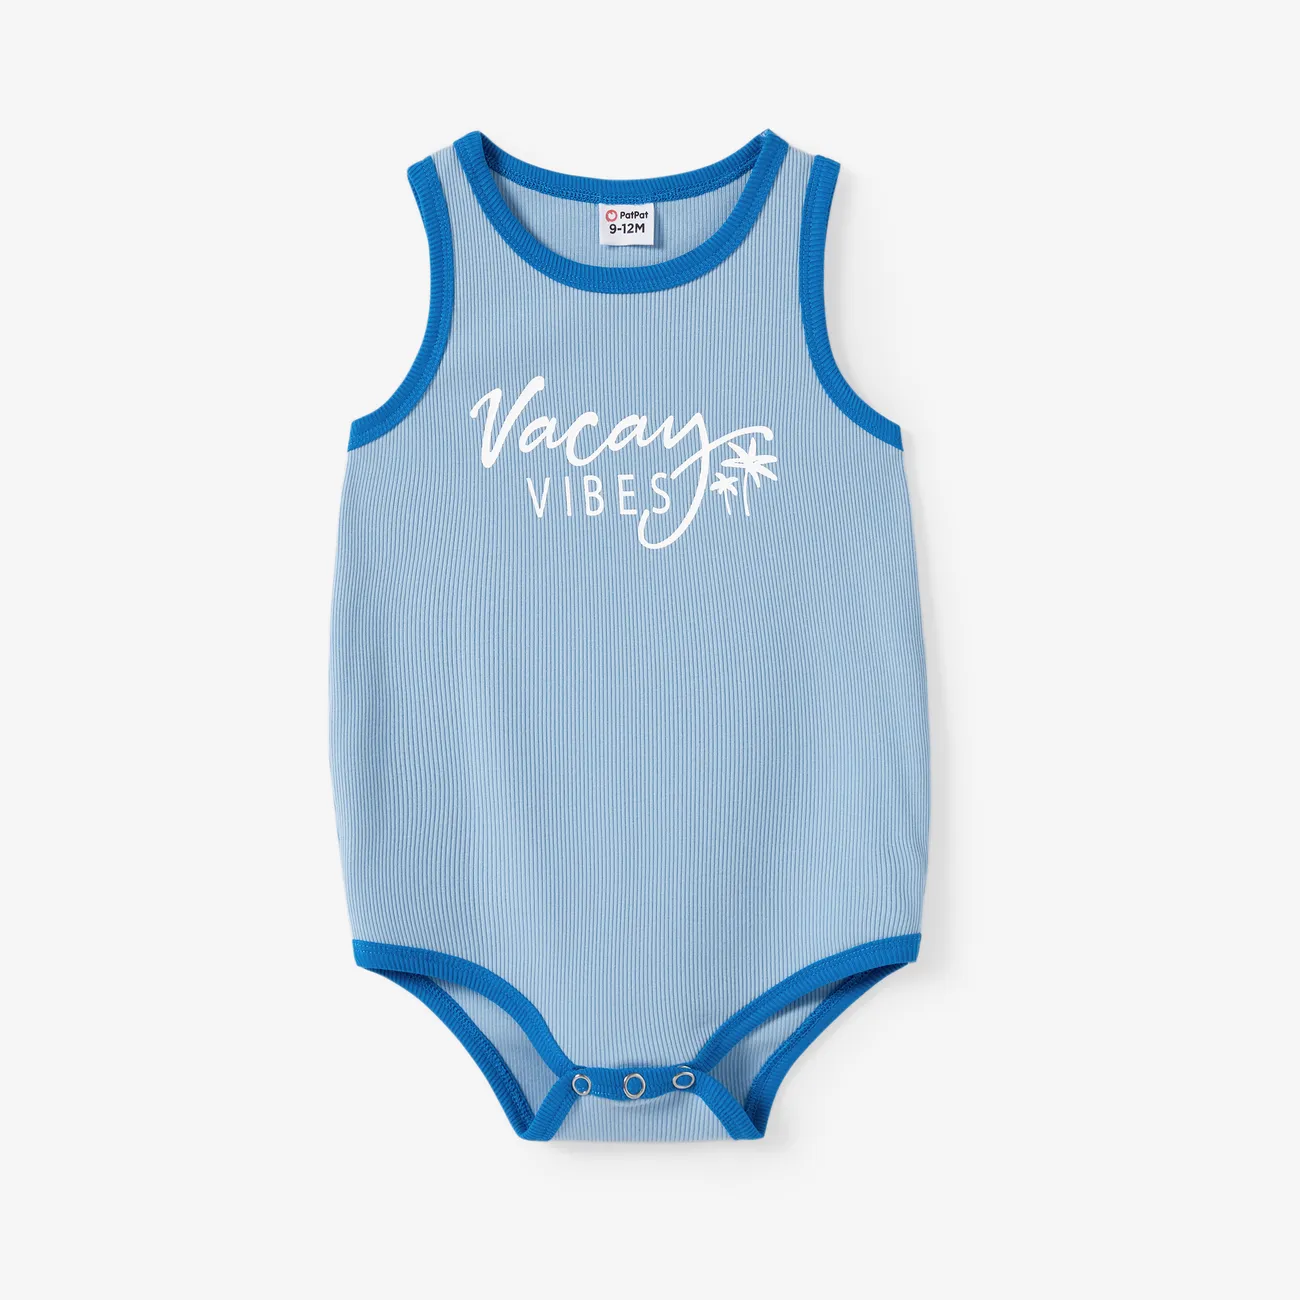 Mommy and Me Matching Vacation Vibe Light Blue Sleeveless Ribbed Tank Top Blue big image 1